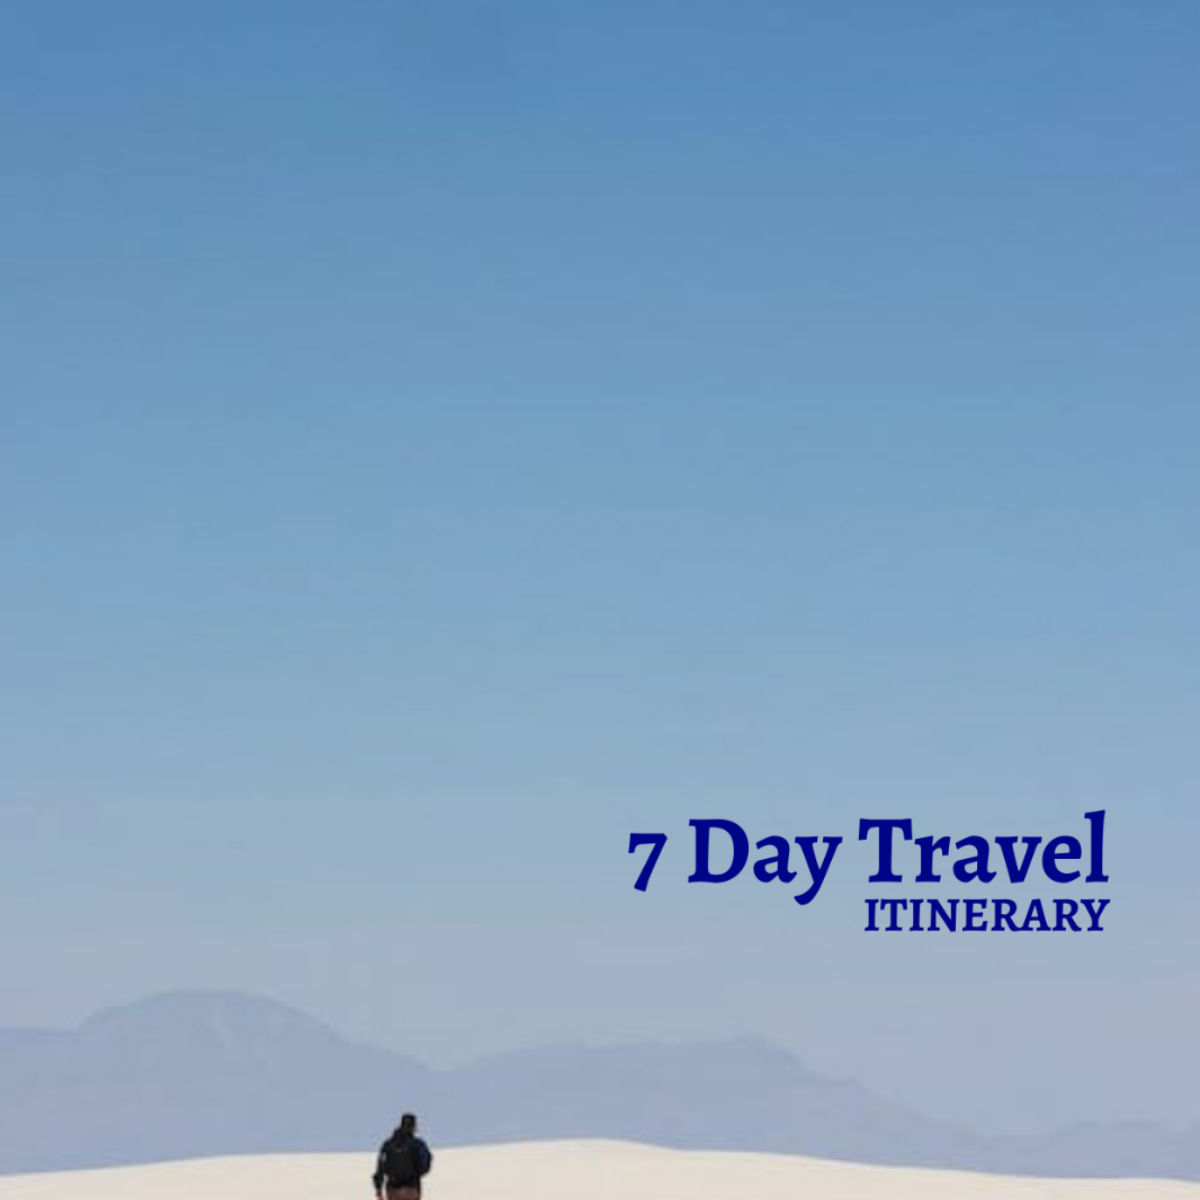 7 Day Travel Itinerary Template